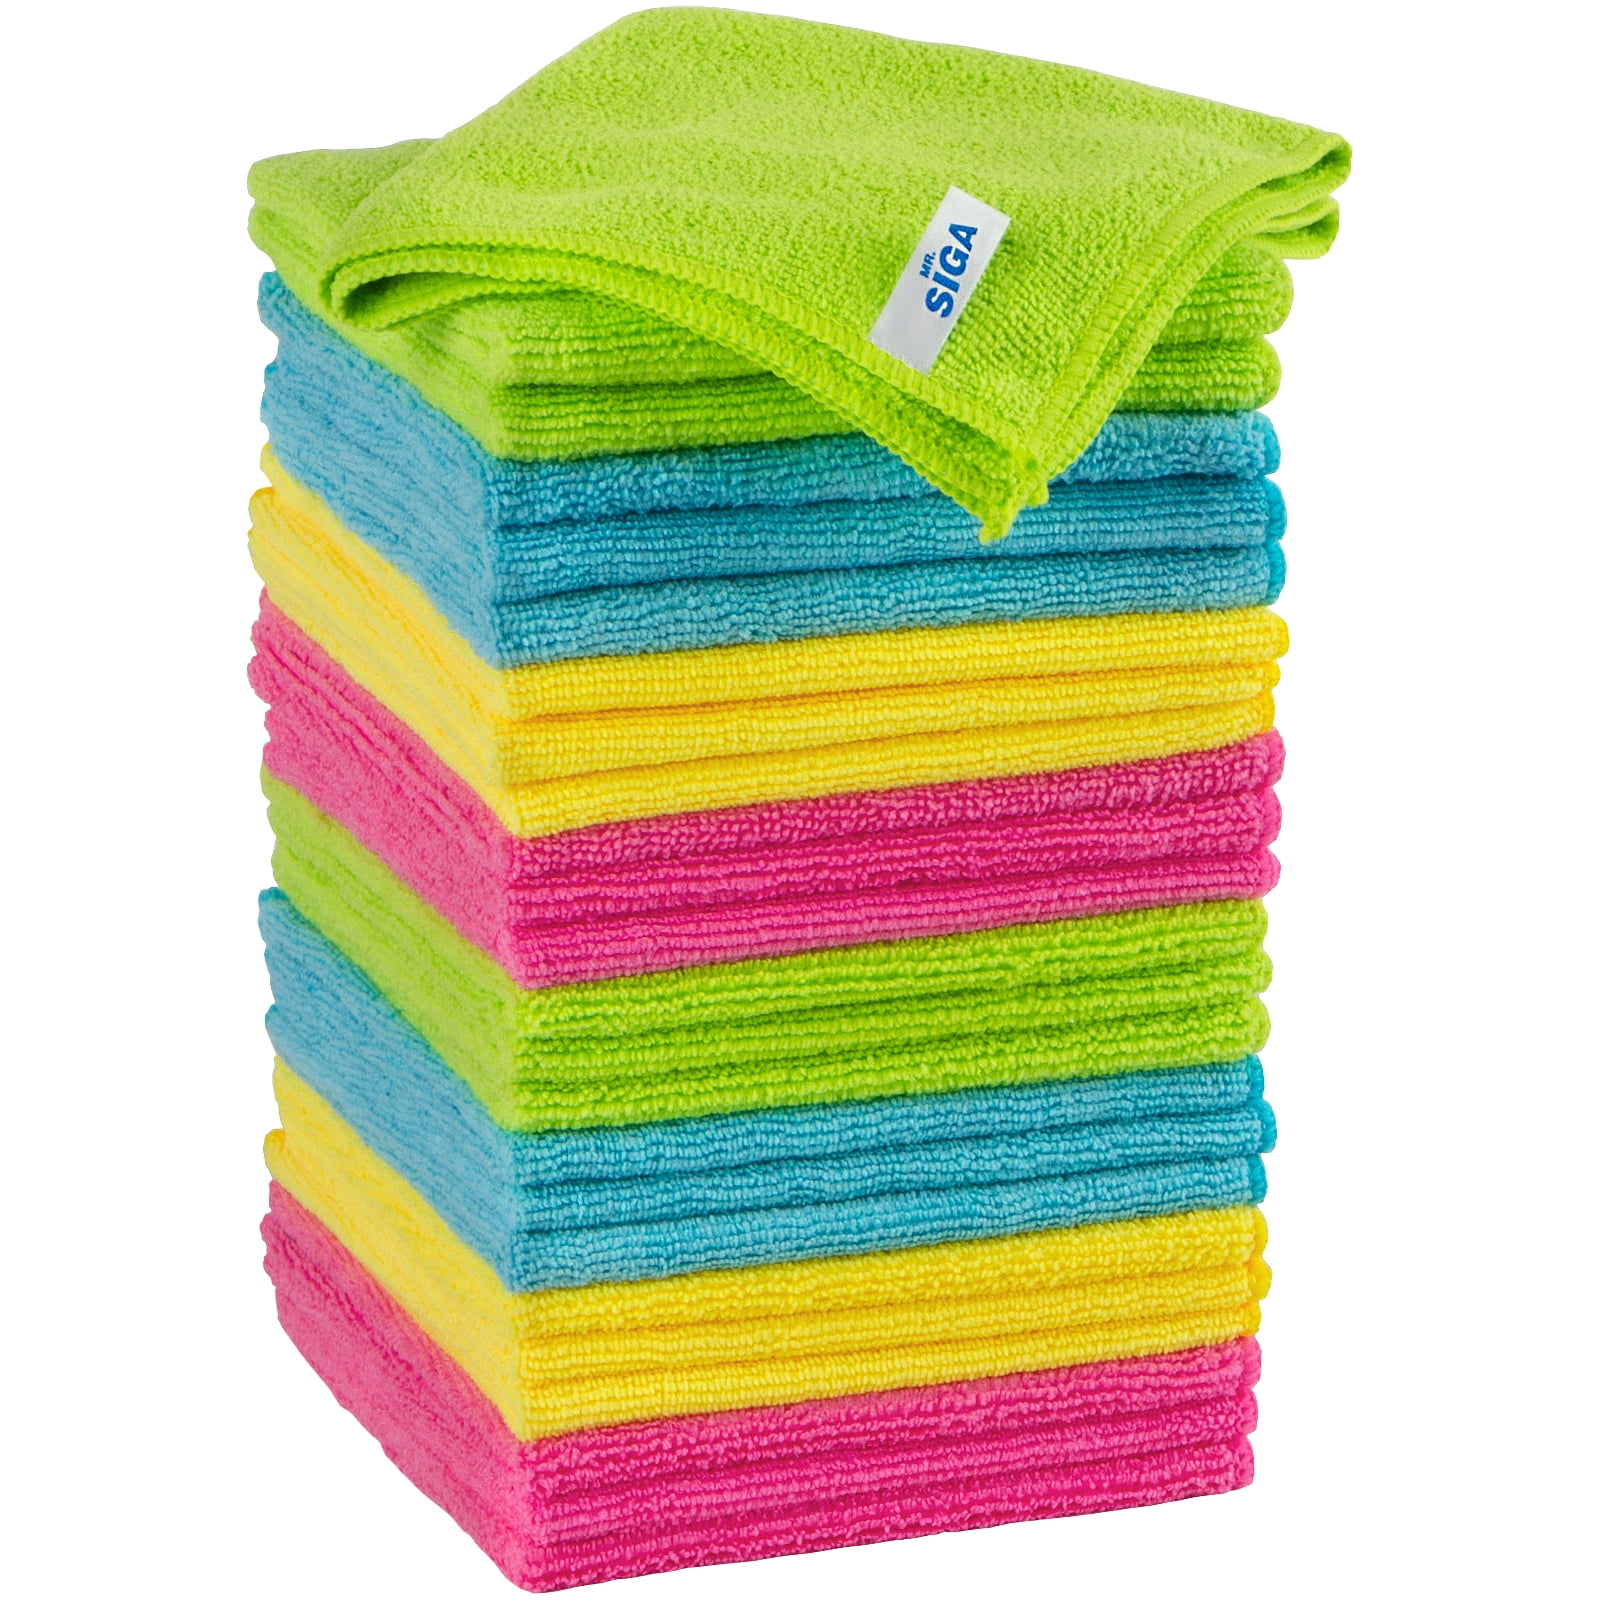 10 x 10 Super Bright Kitchen Cleaning Washing Up Super Absorbent Fabric Cloth UK 